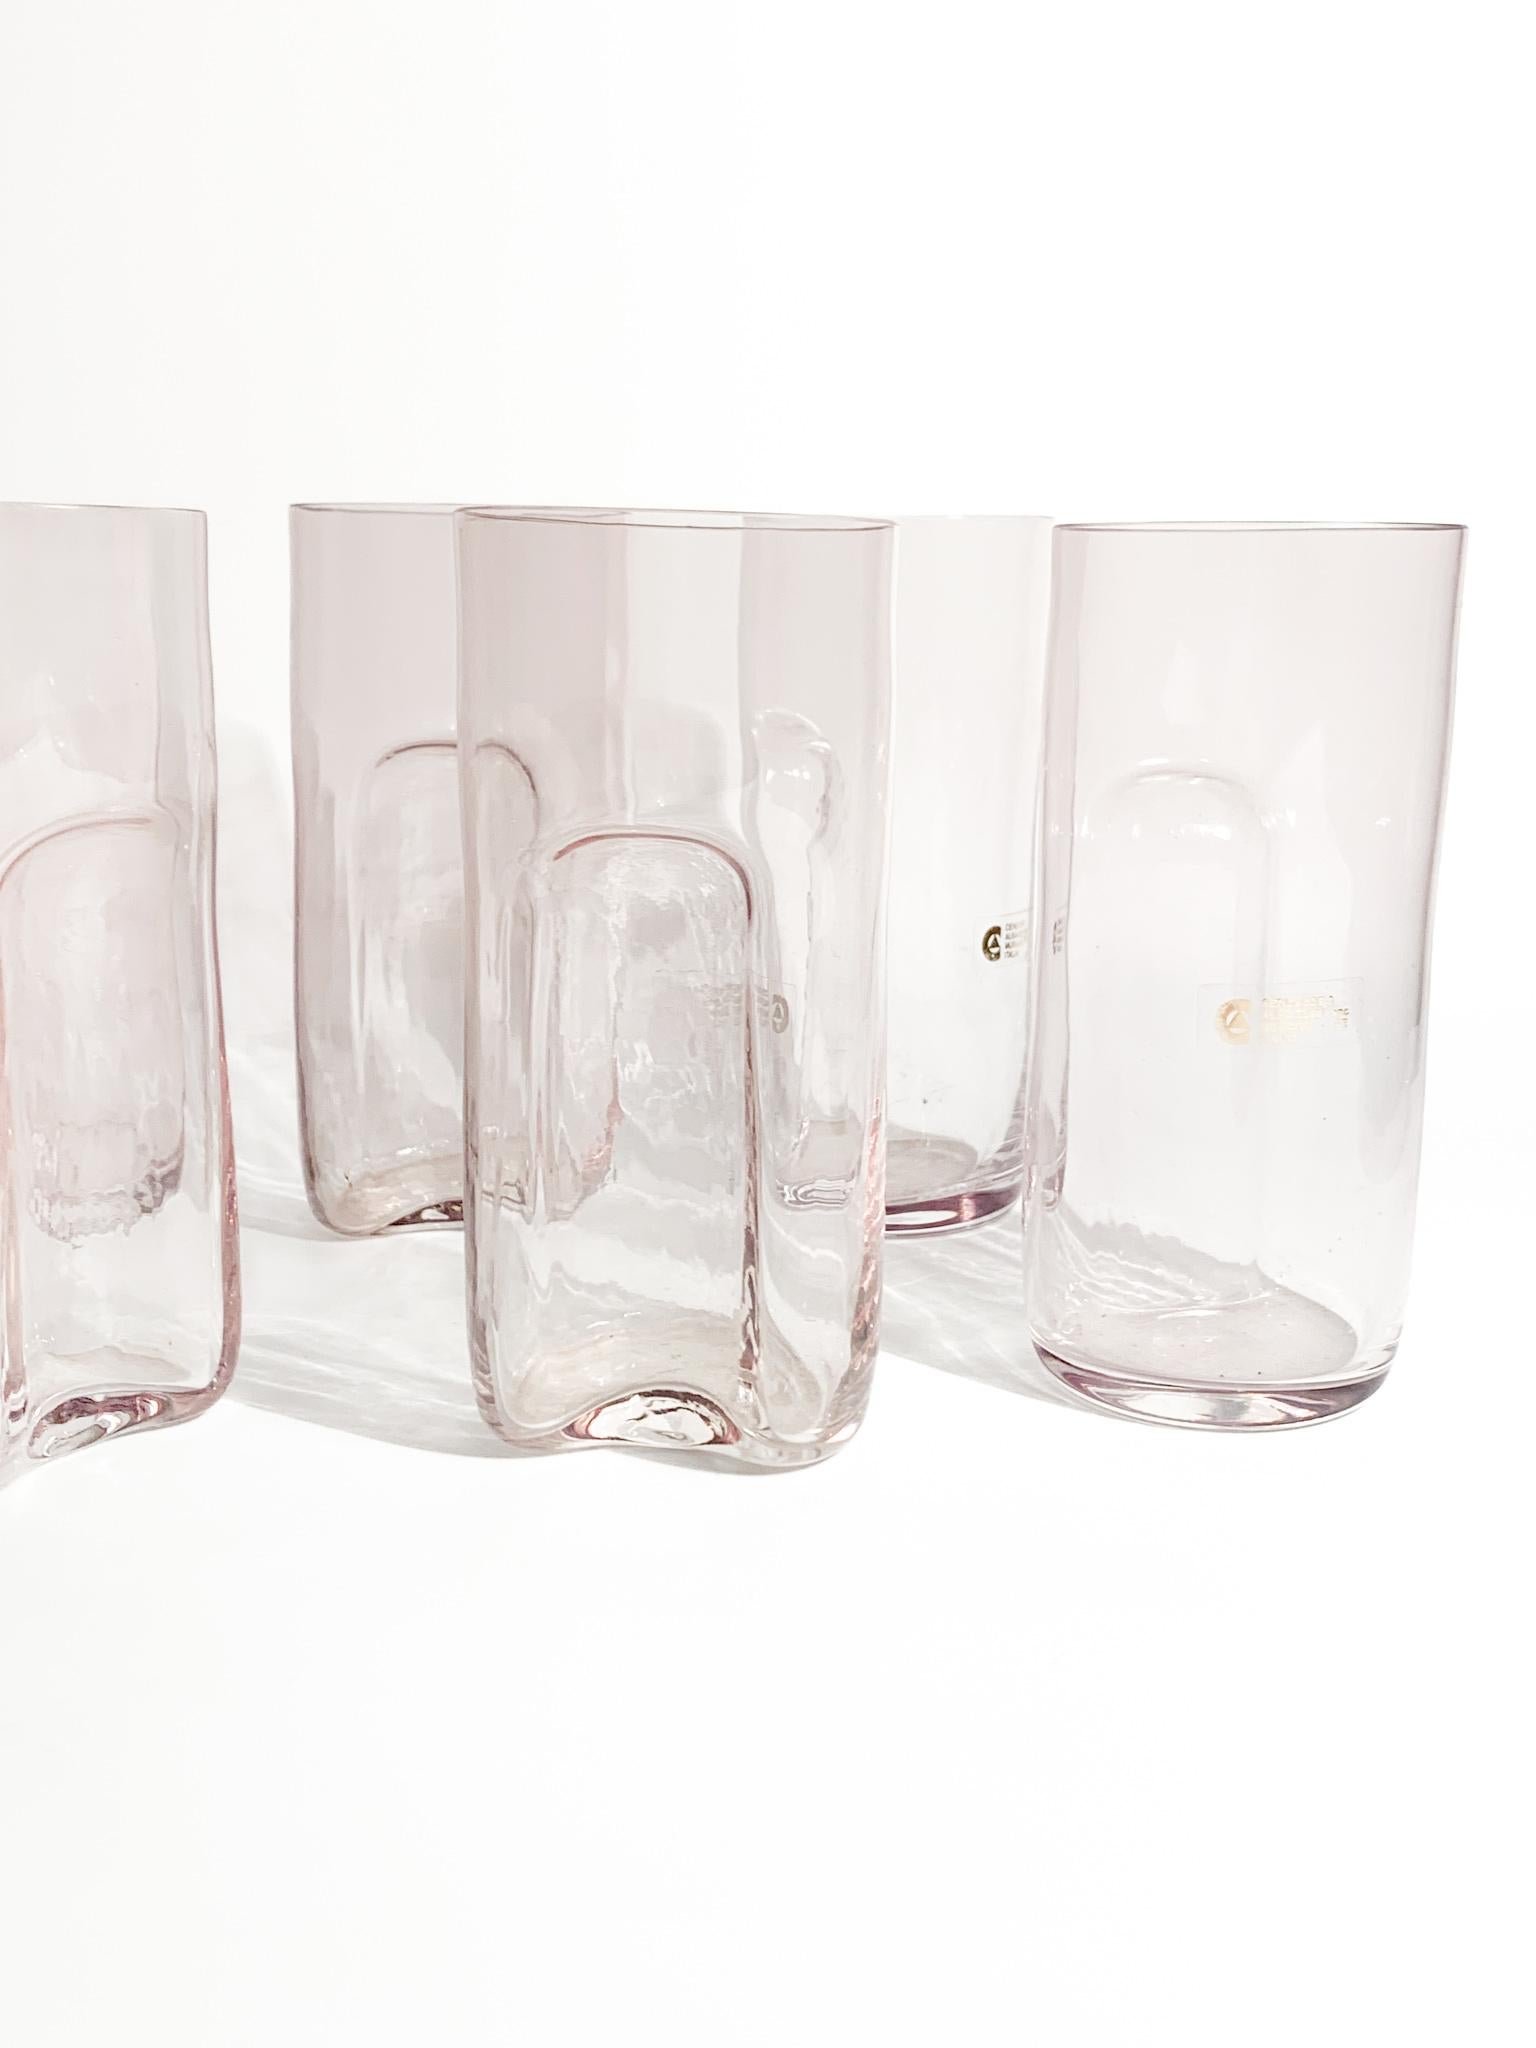 Italian Set of Six Glasses and Carafe in Murano Glass by Cenedese and Albarelli 1970s For Sale